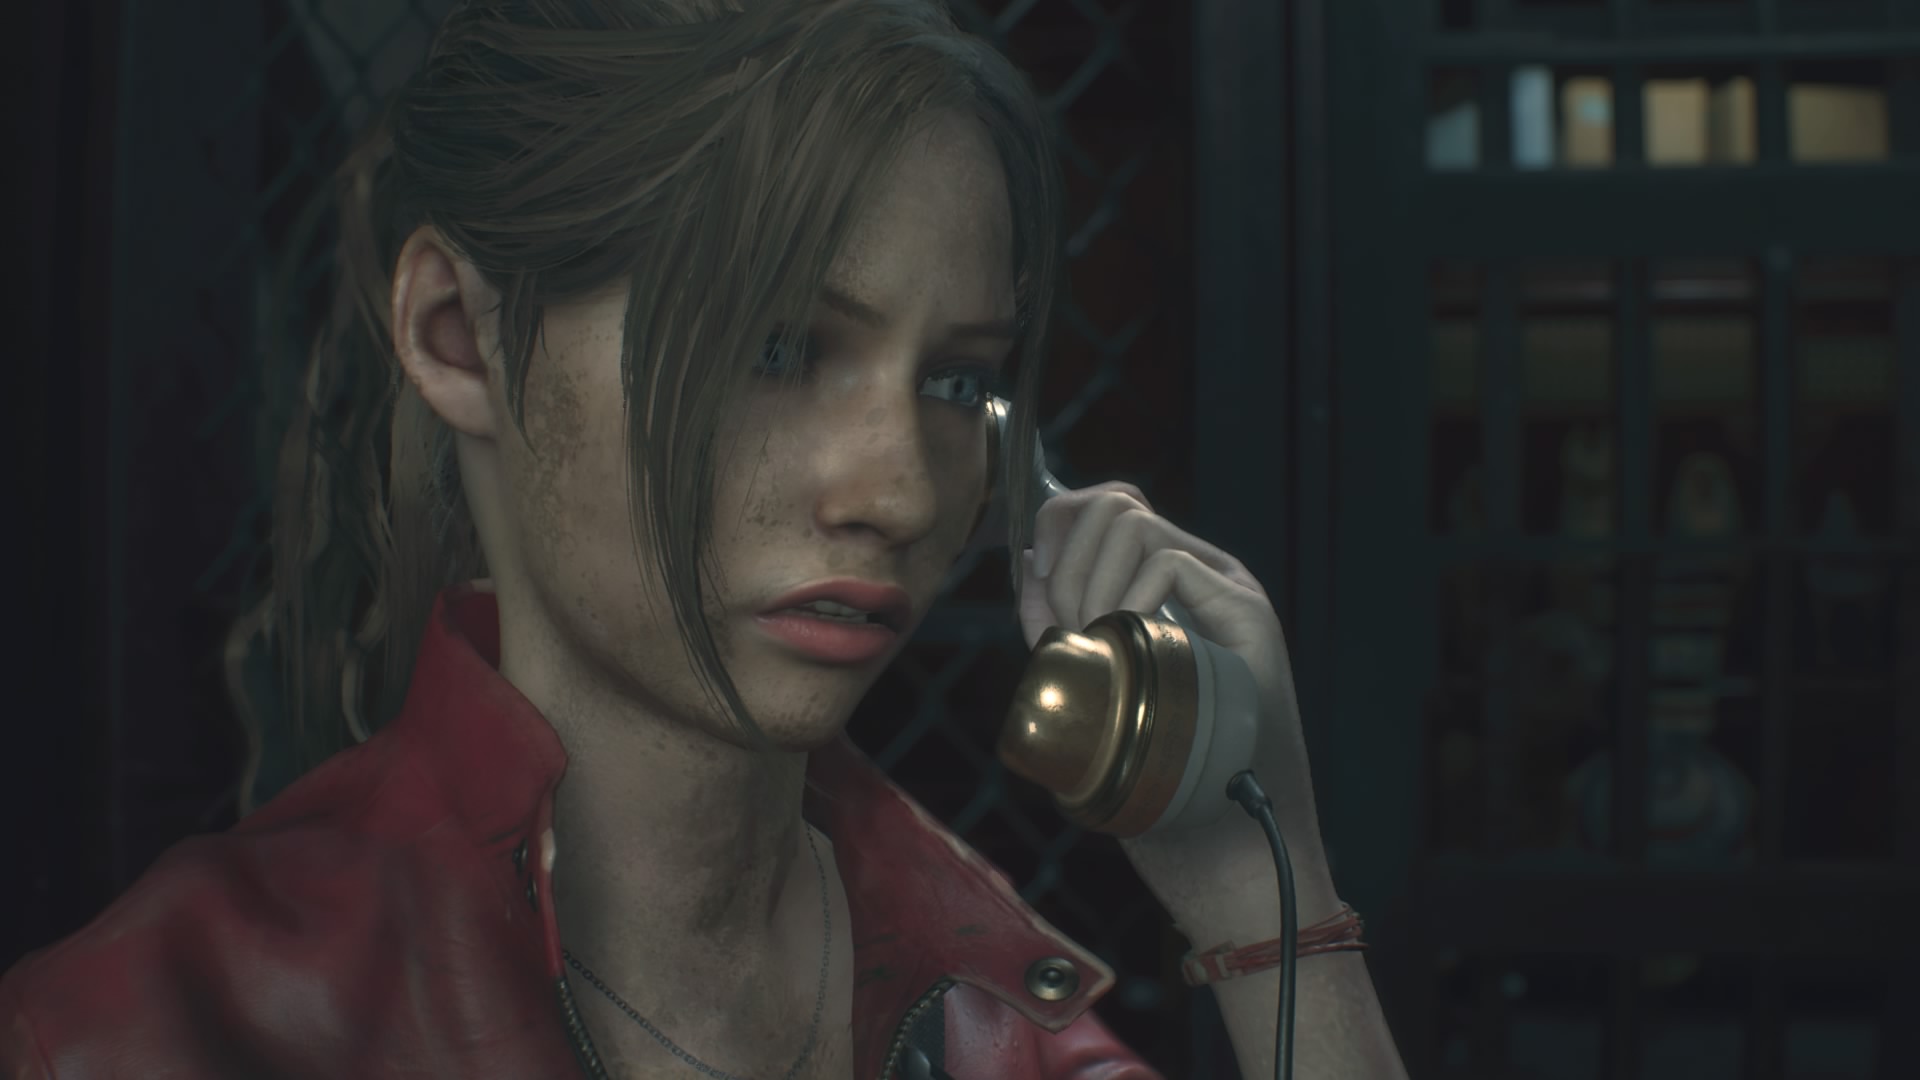 General 1920x1080 Resident Evil 2 Remake Resident Evil 2 Resident Evil Claire Redfield screen shot video games video game characters Capcom